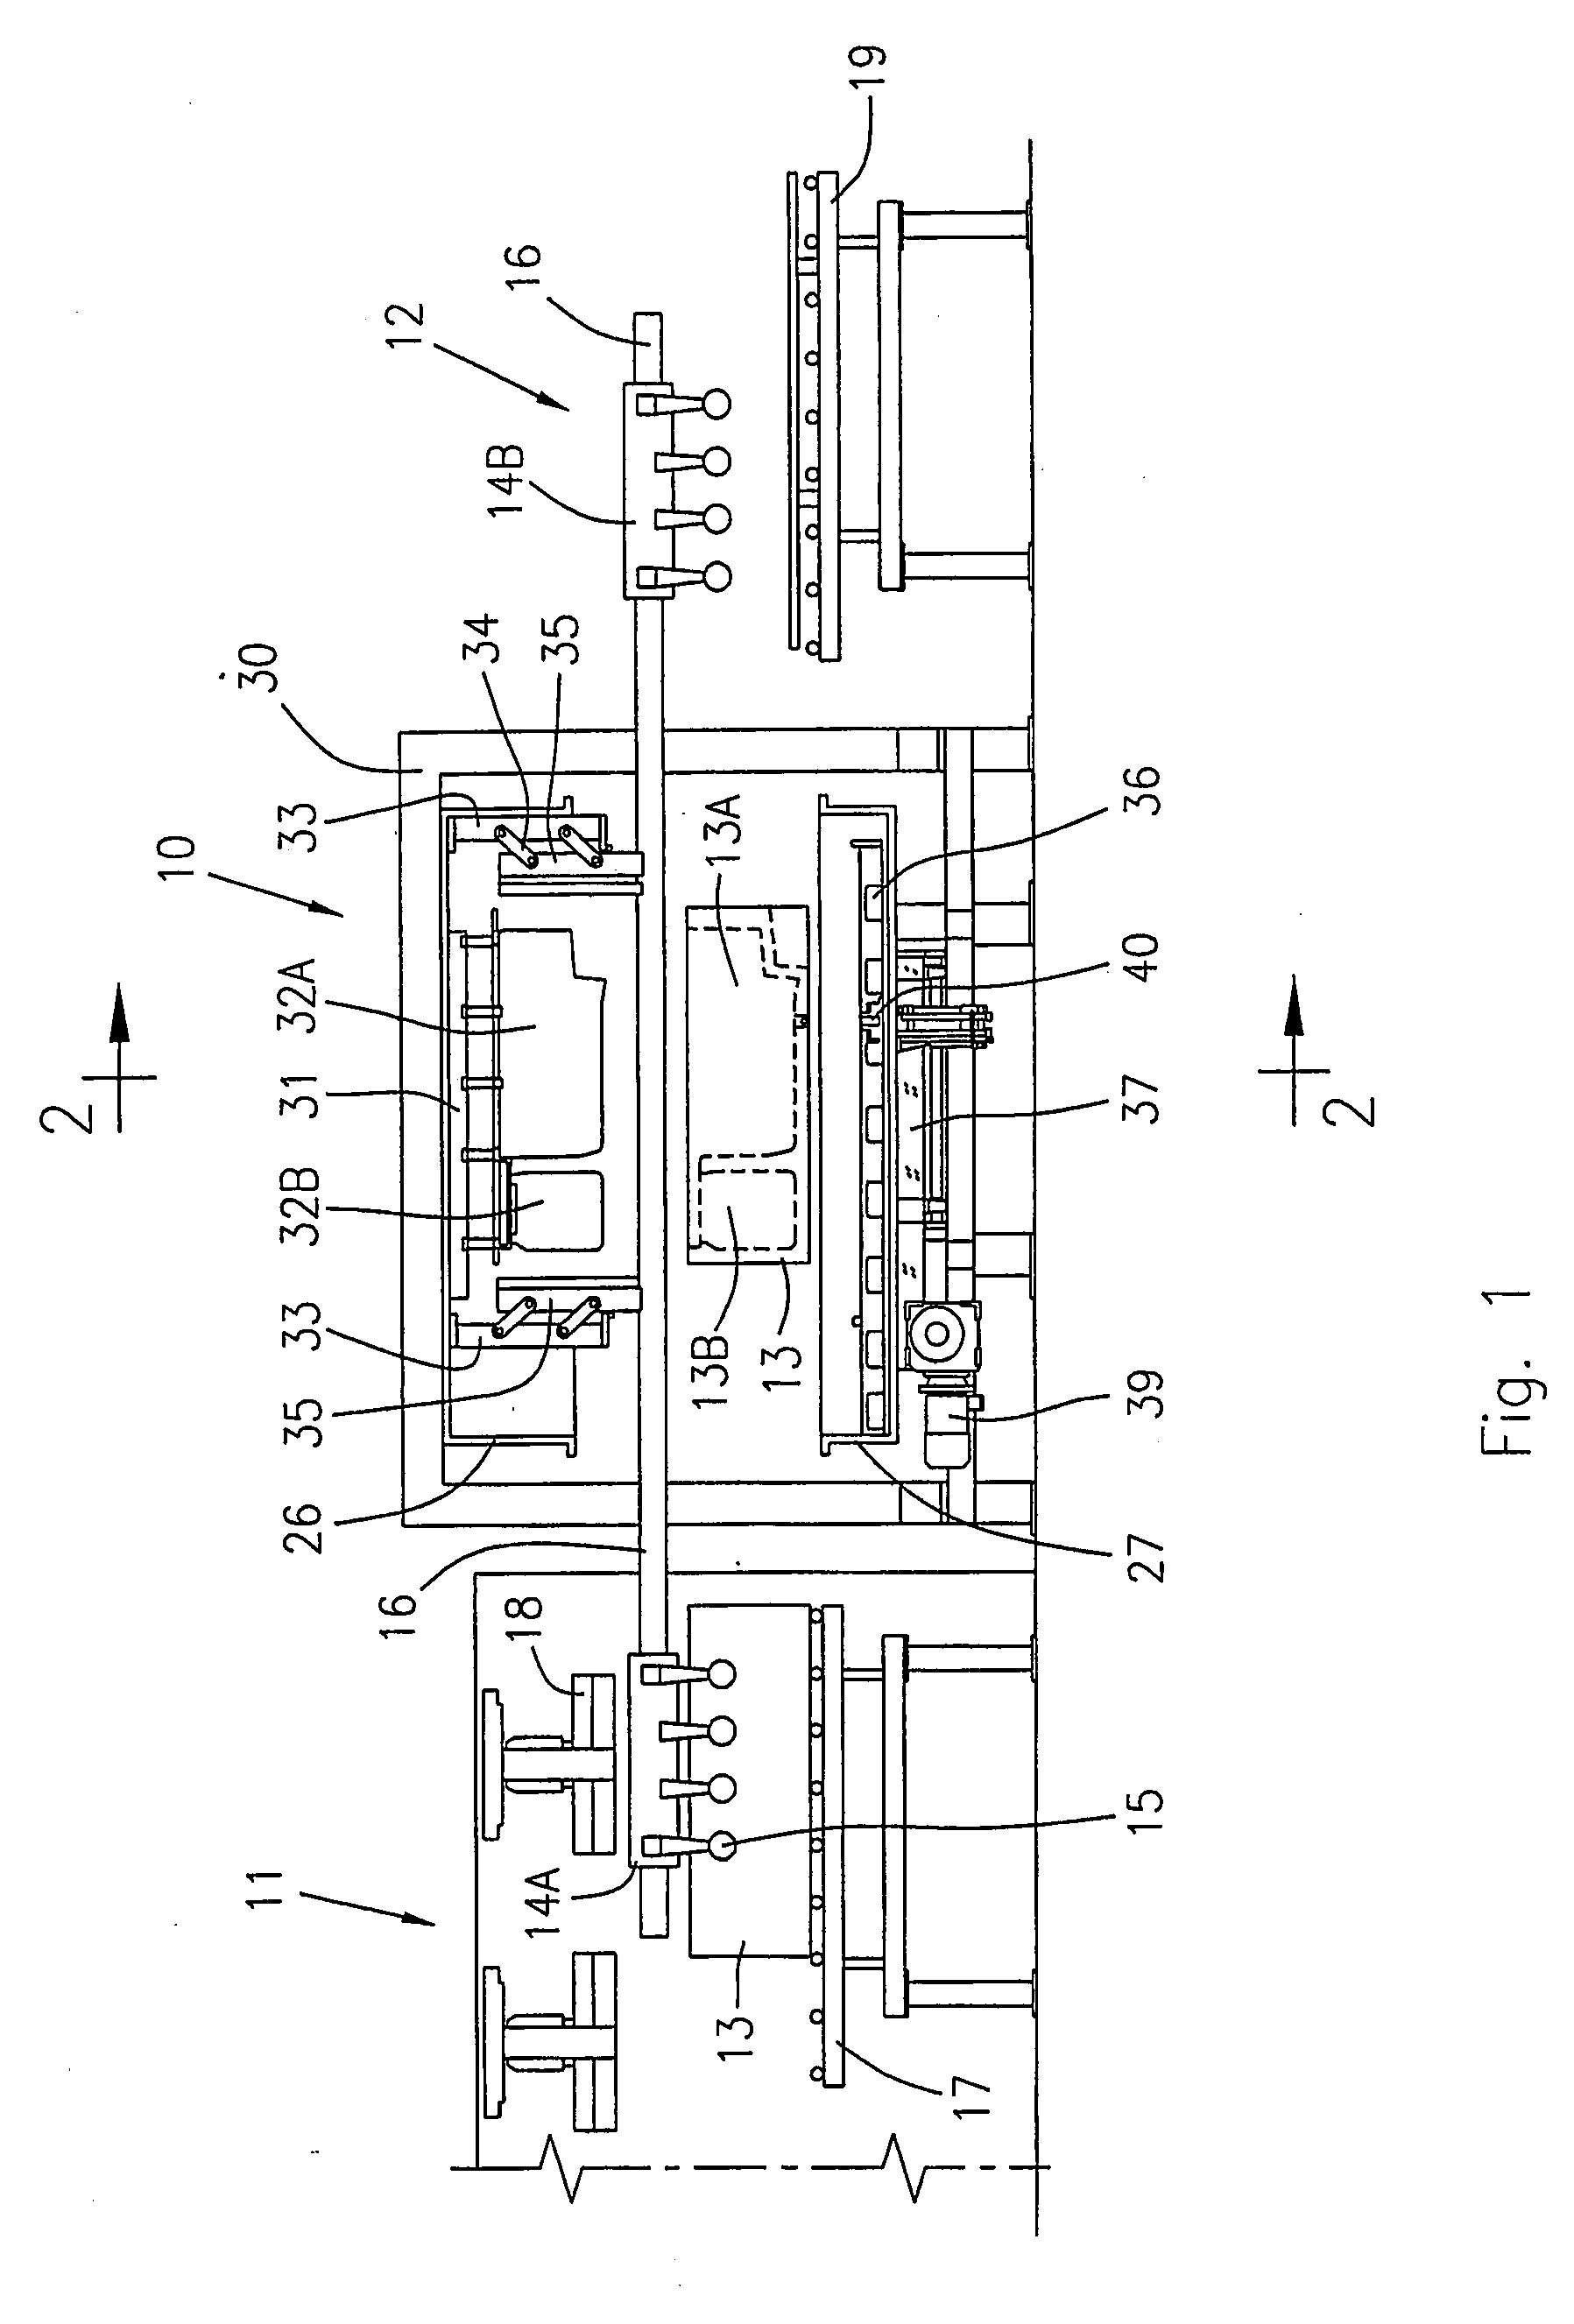 Method and Apparatus for Vacuum Foaming Refrigerator Cabinets